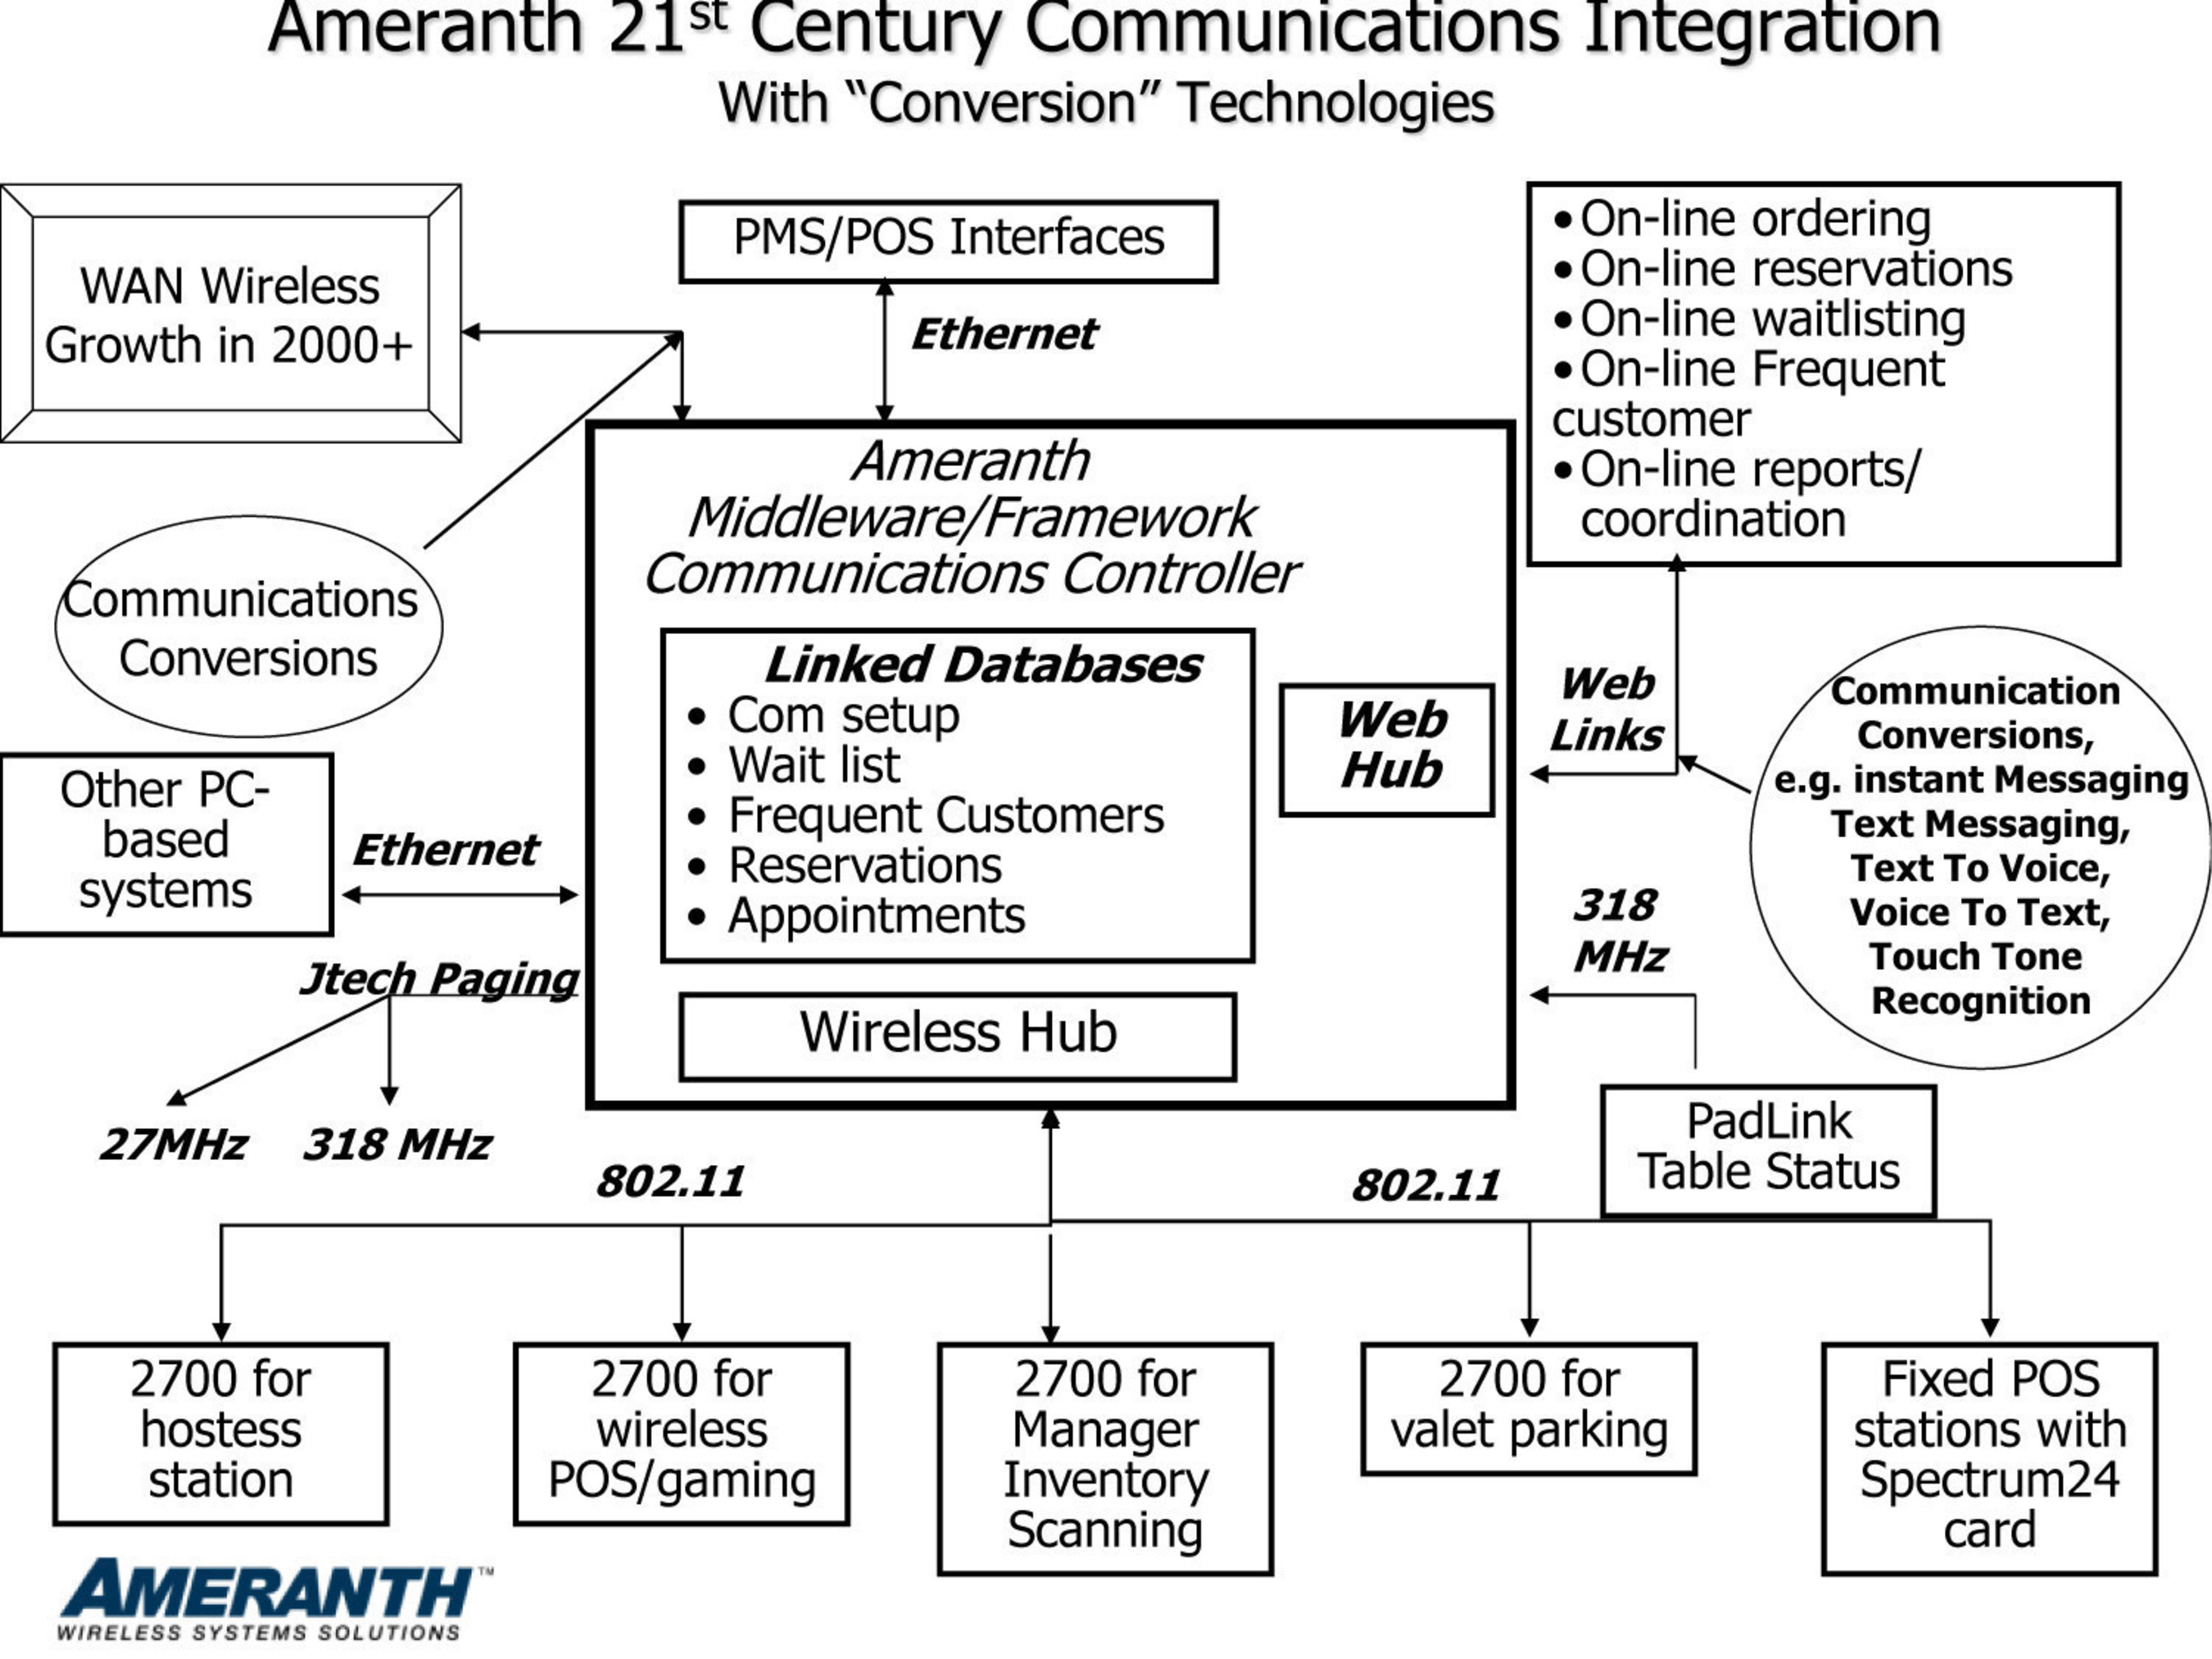 Ameranth Files New Patent Application for its 21st Century Communications(TM)  Intelligent Automated Assistant (IAA)Data Synchronization Inventions